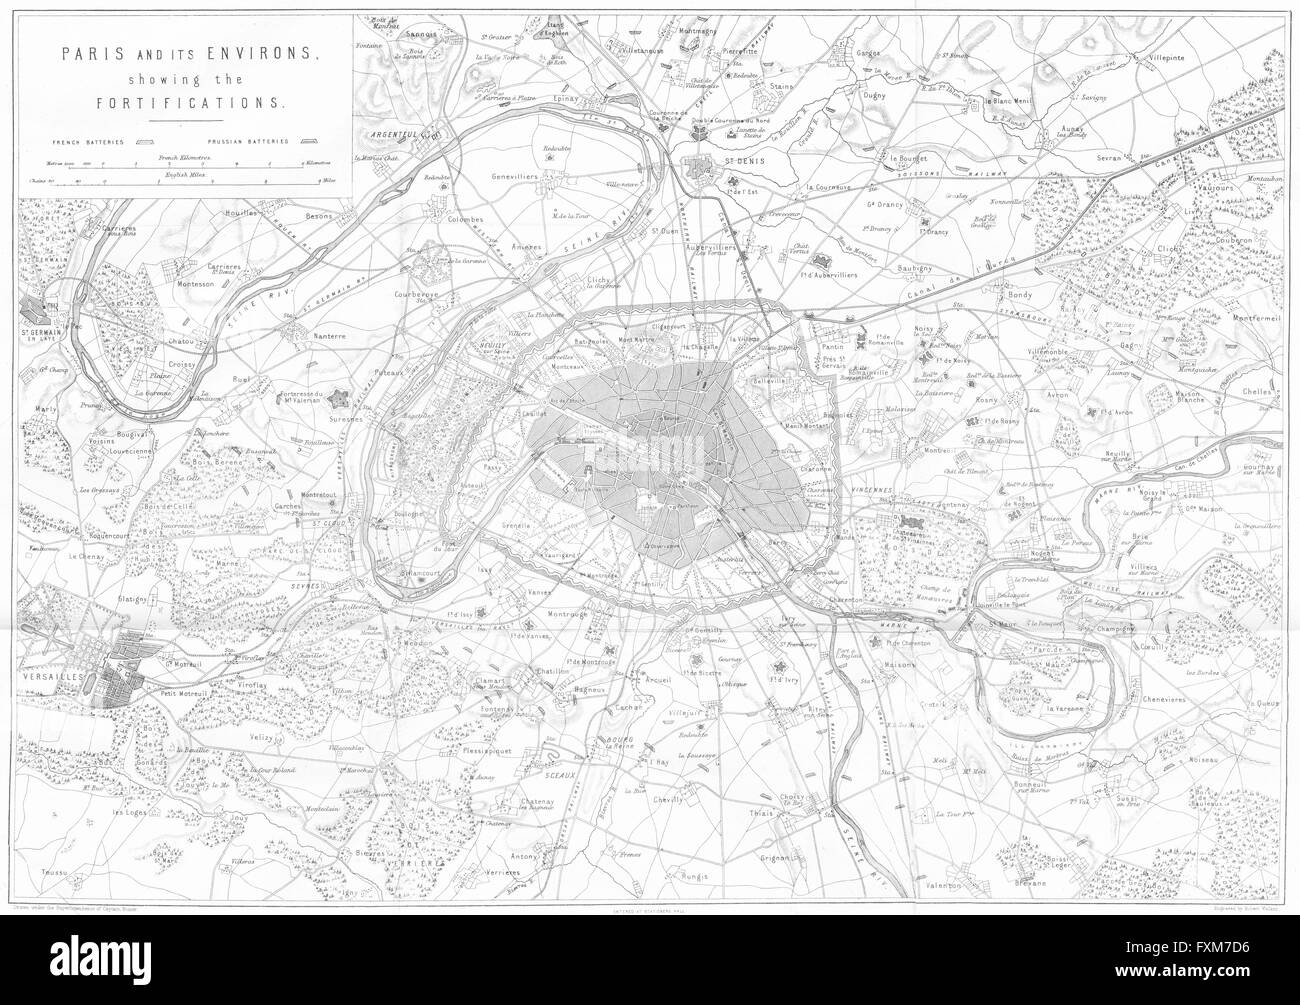 PARIS AREA: Fortifications; Franco-Prussian war, 1875 antique map Stock Photo